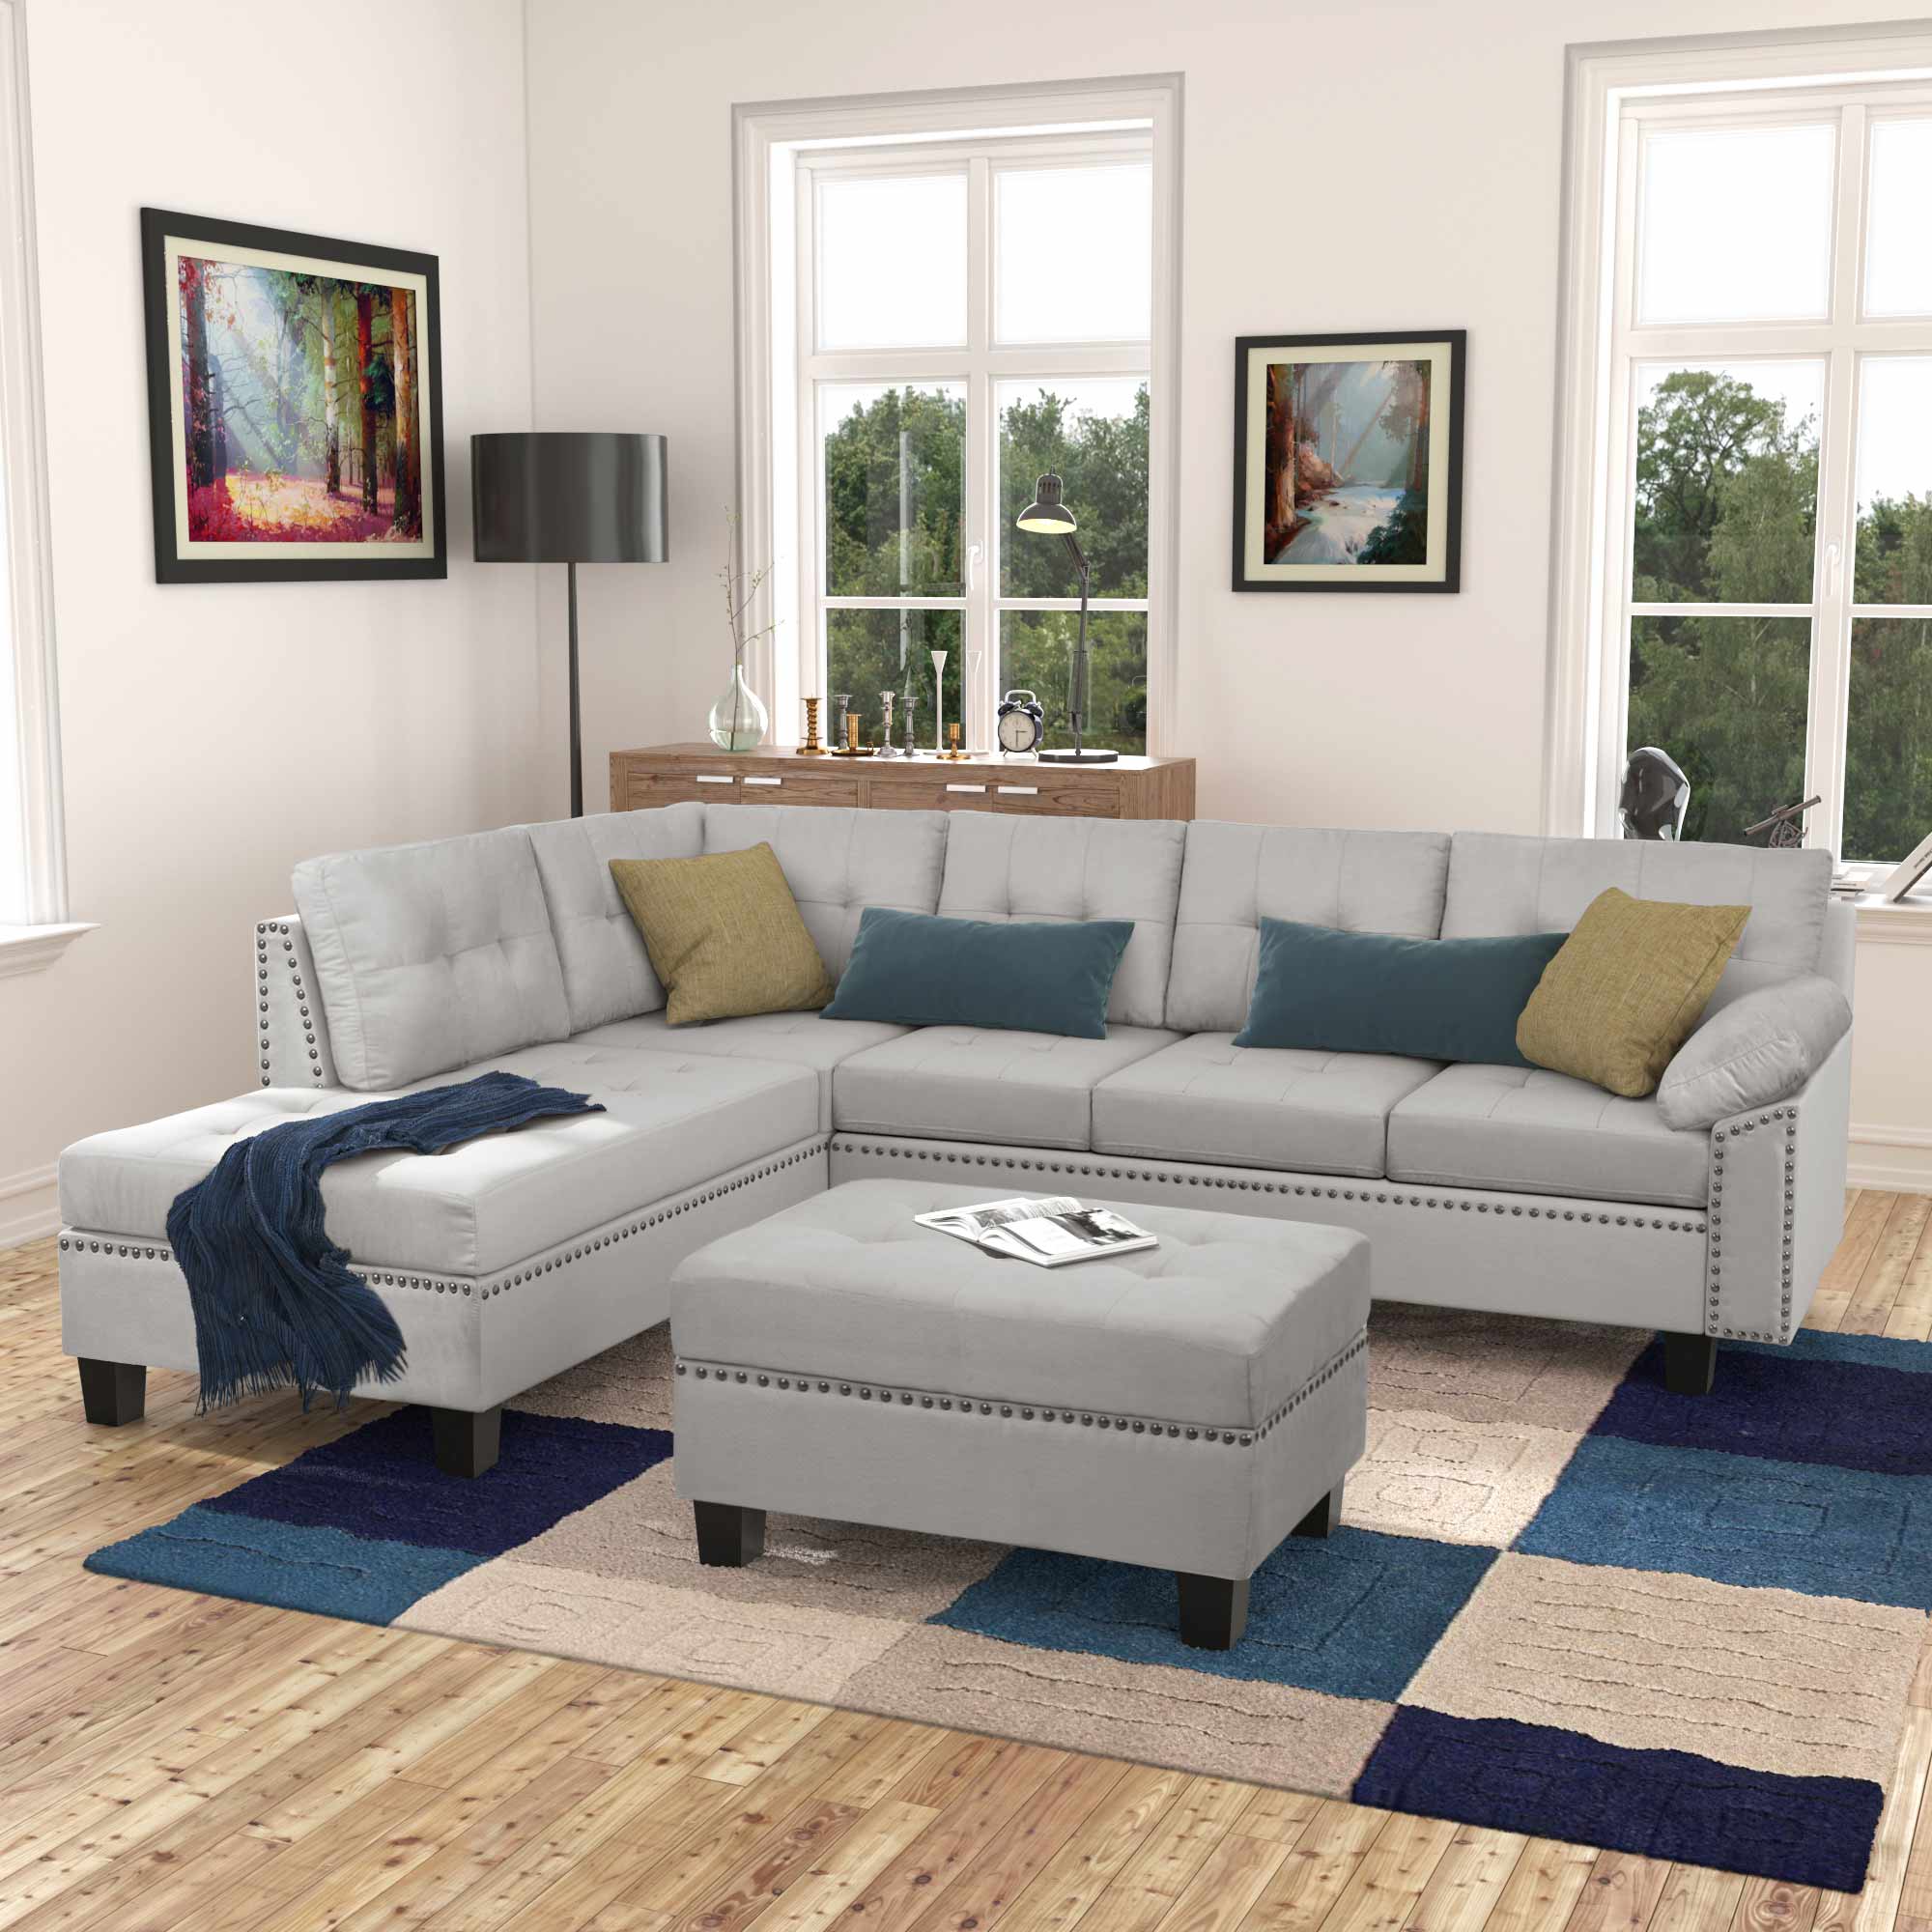 L-Shaped Sectional Sofa Set With Chaise Lounge